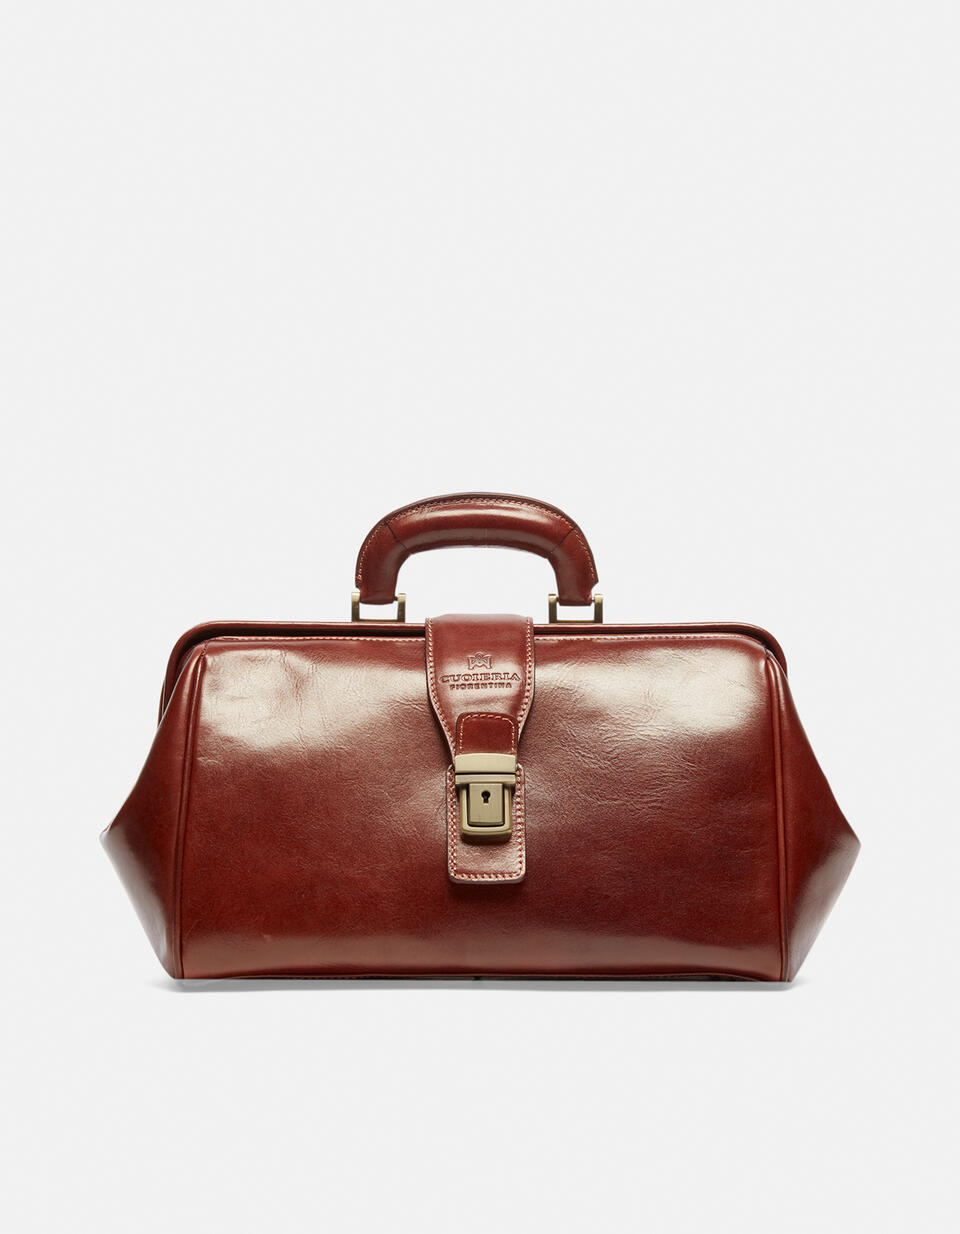 Small leather doctor's bag - Doctor Bags | Briefcases MARRONE - Doctor Bags | BriefcasesCuoieria Fiorentina